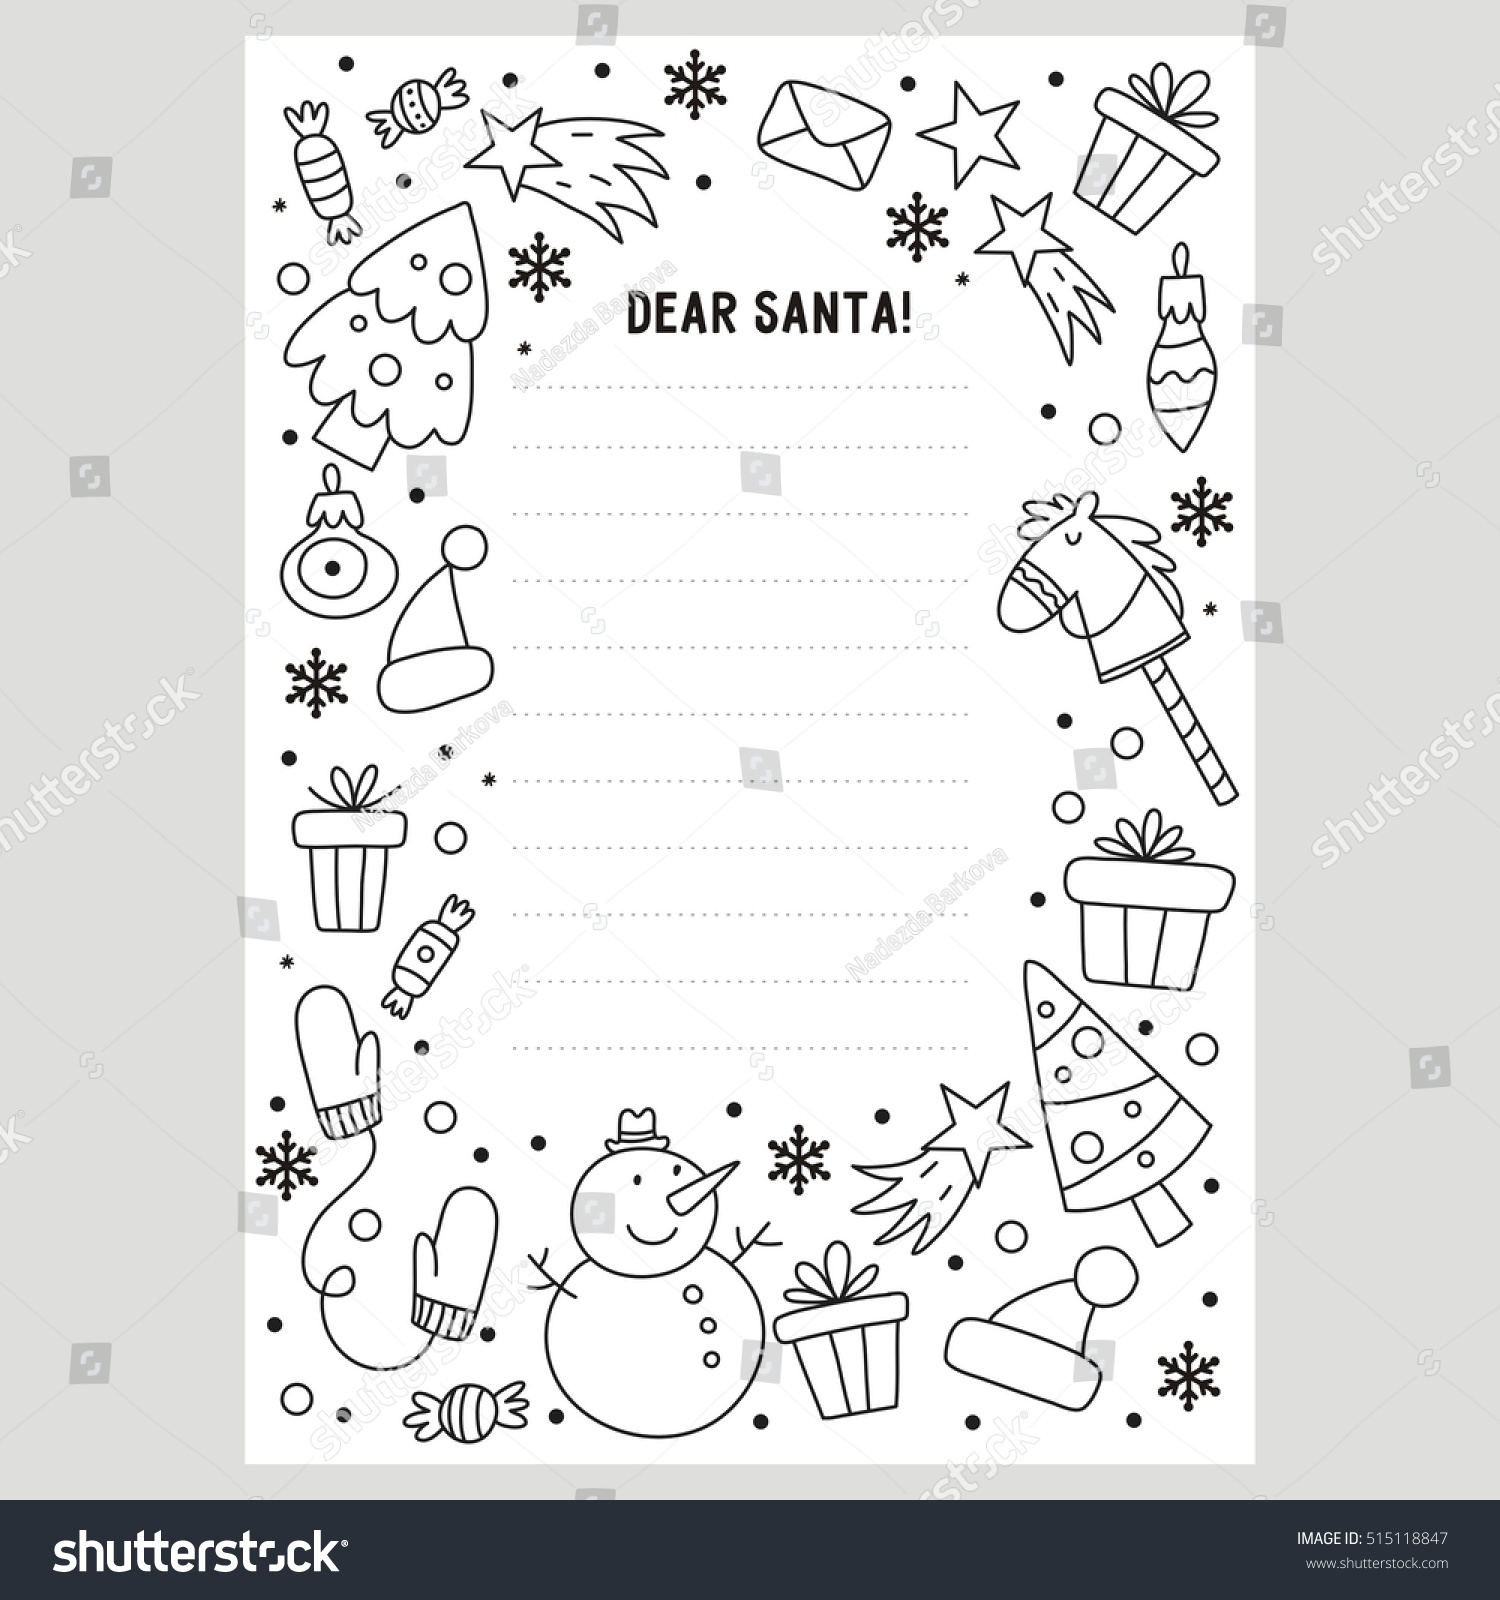 Dear santa letter coloring page stock vector royalty free